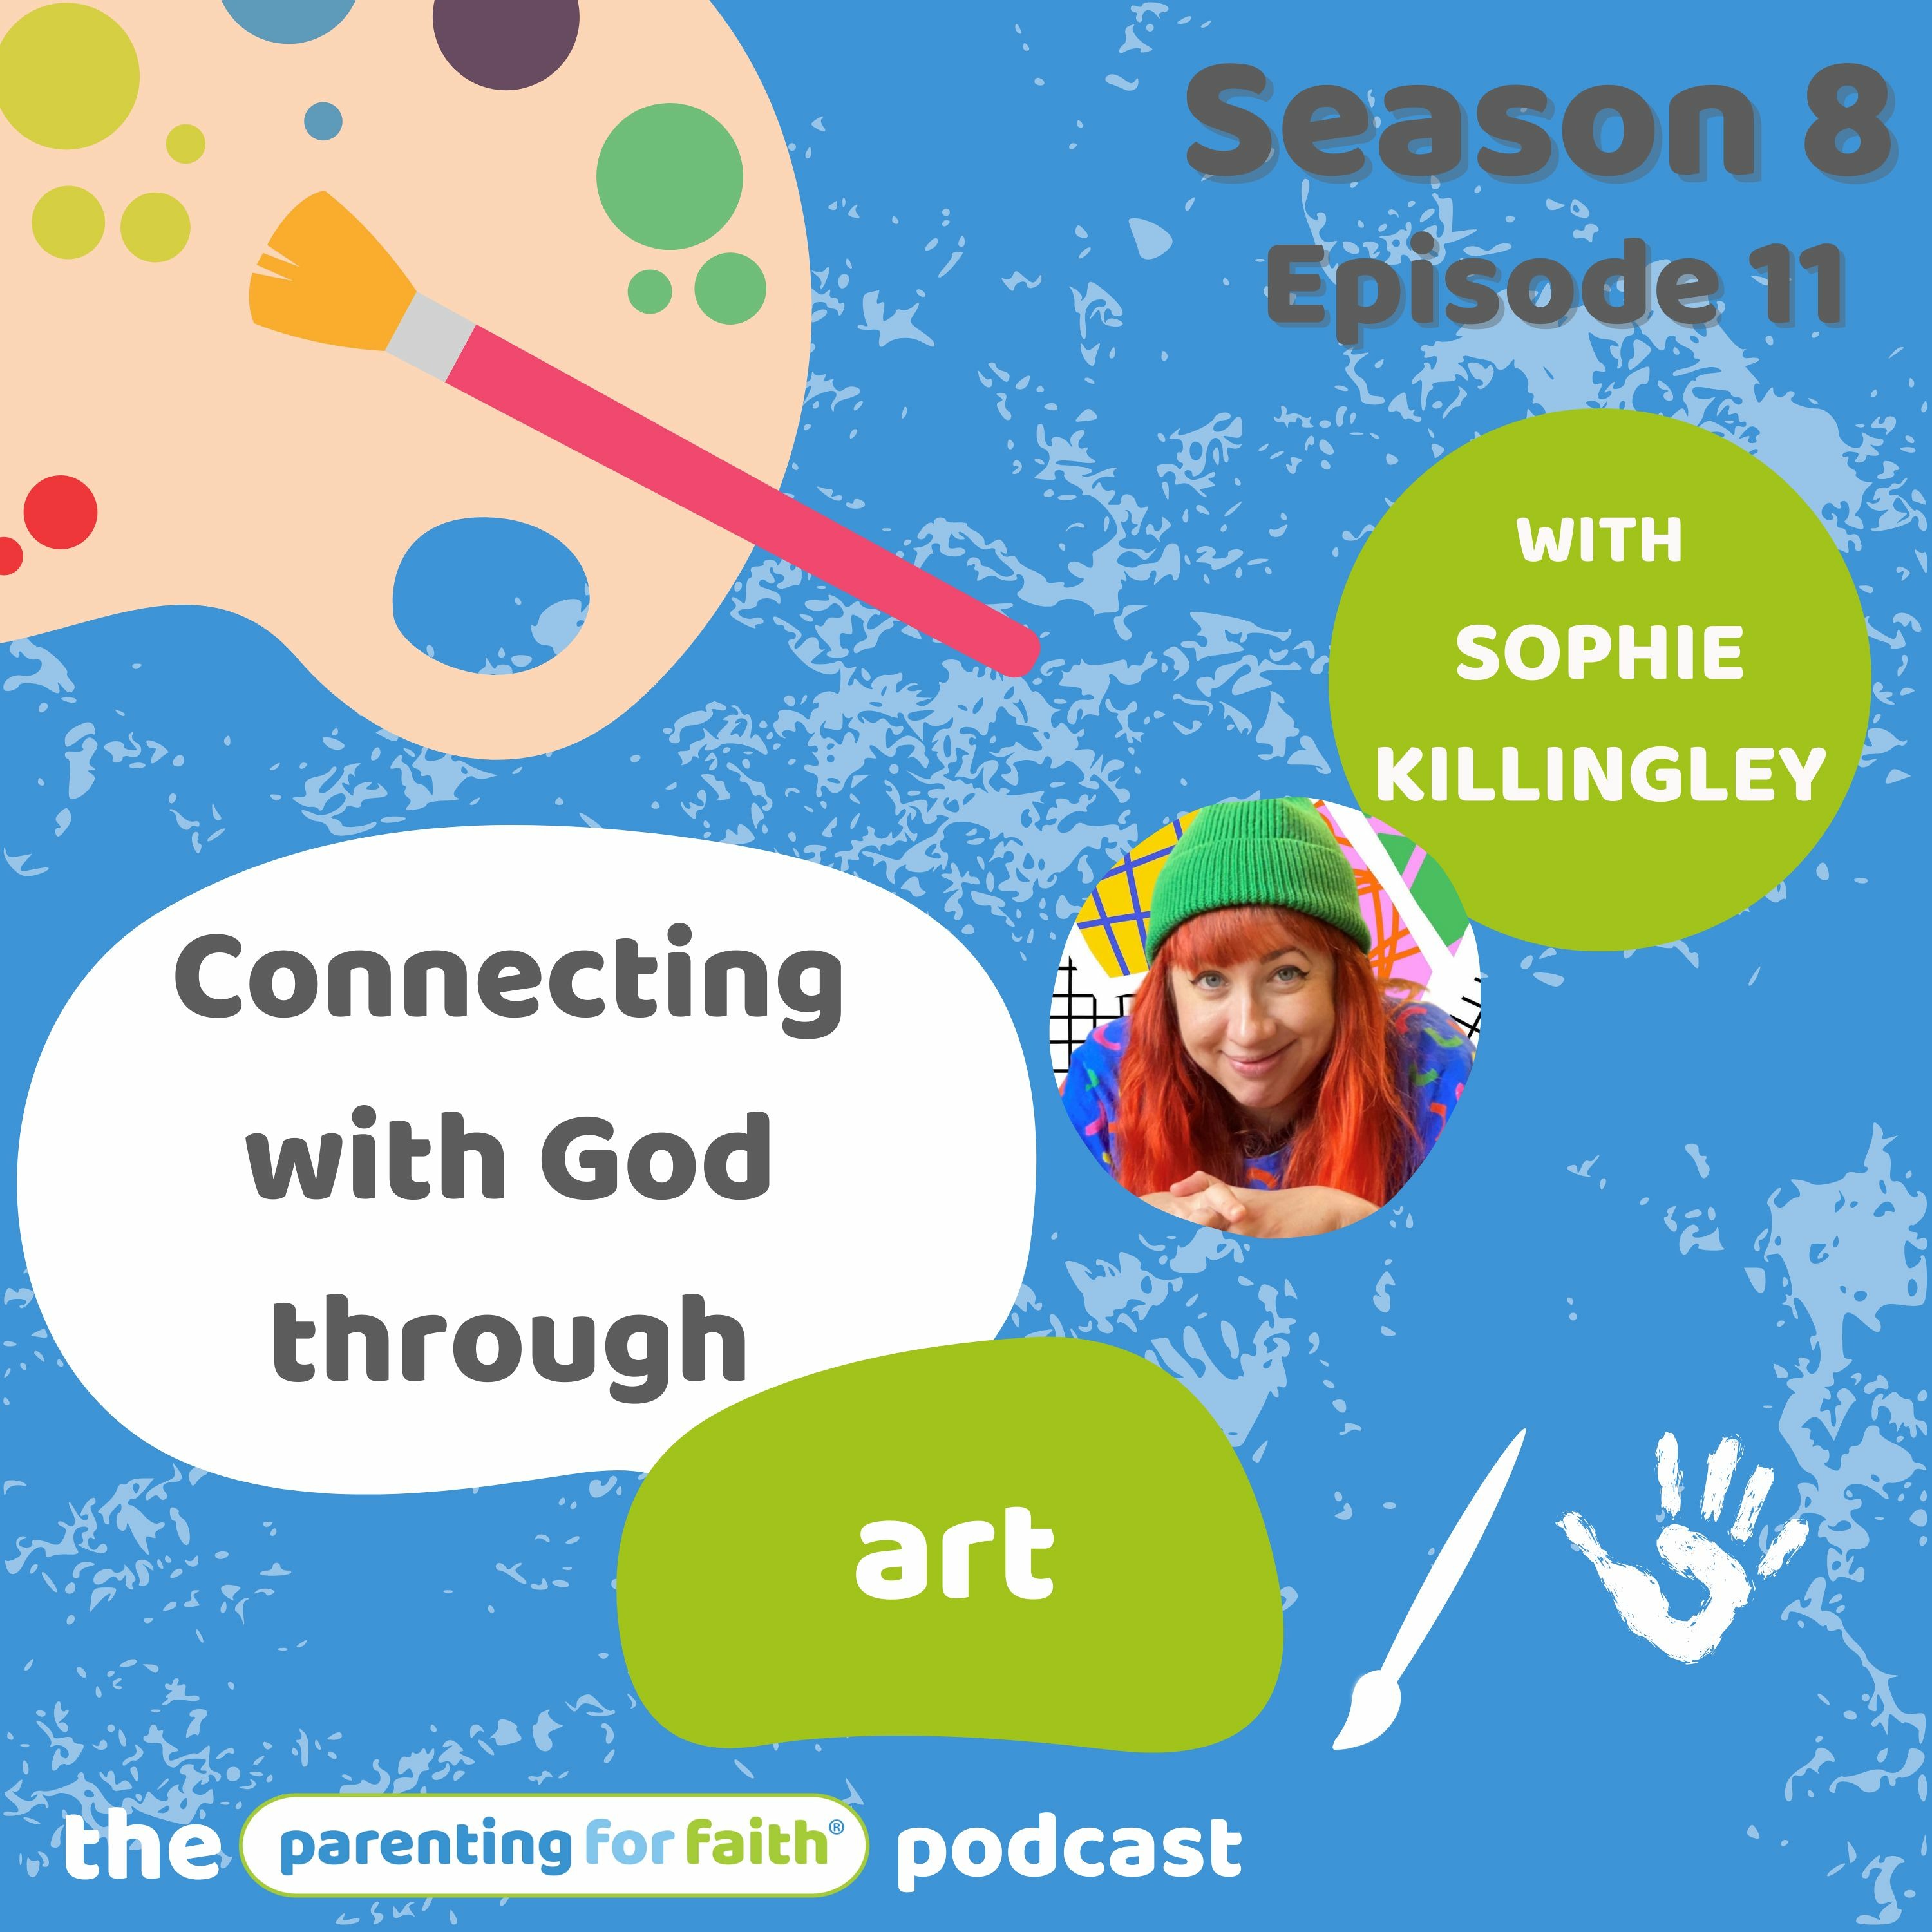 S8E11: Connecting with God through art with Sophie Killingley